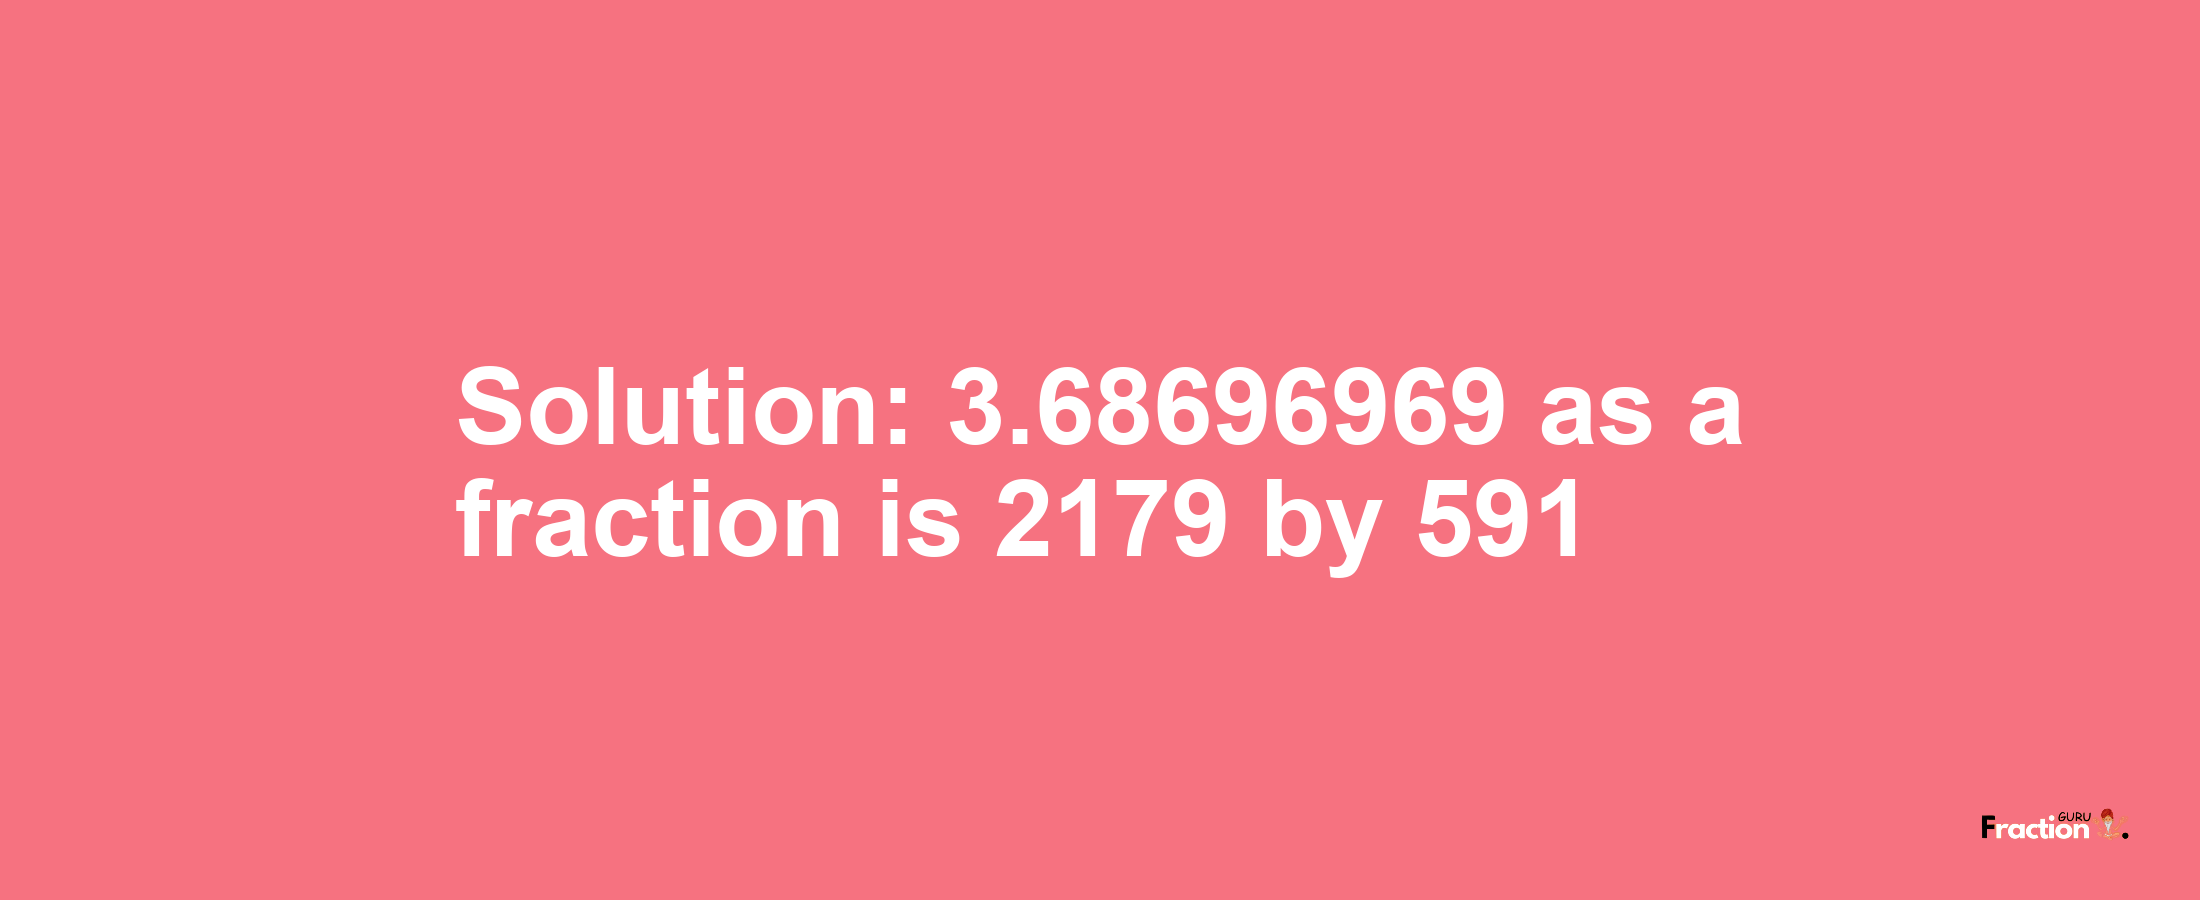 Solution:3.68696969 as a fraction is 2179/591